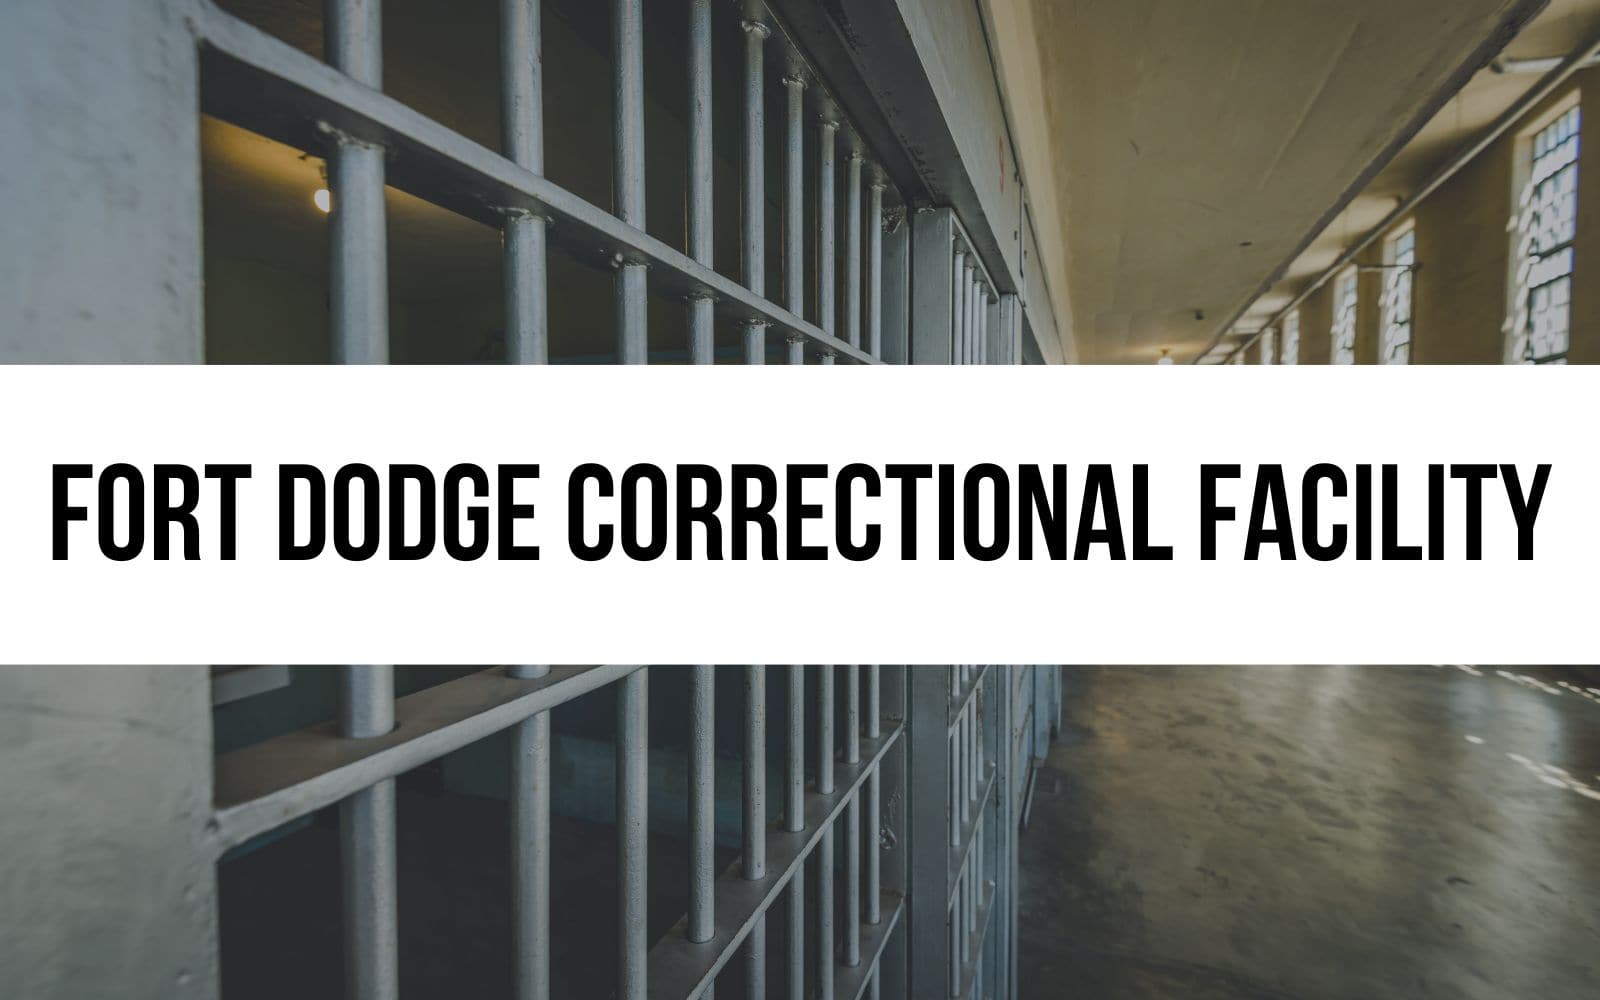 Fort Dodge Correctional Facility